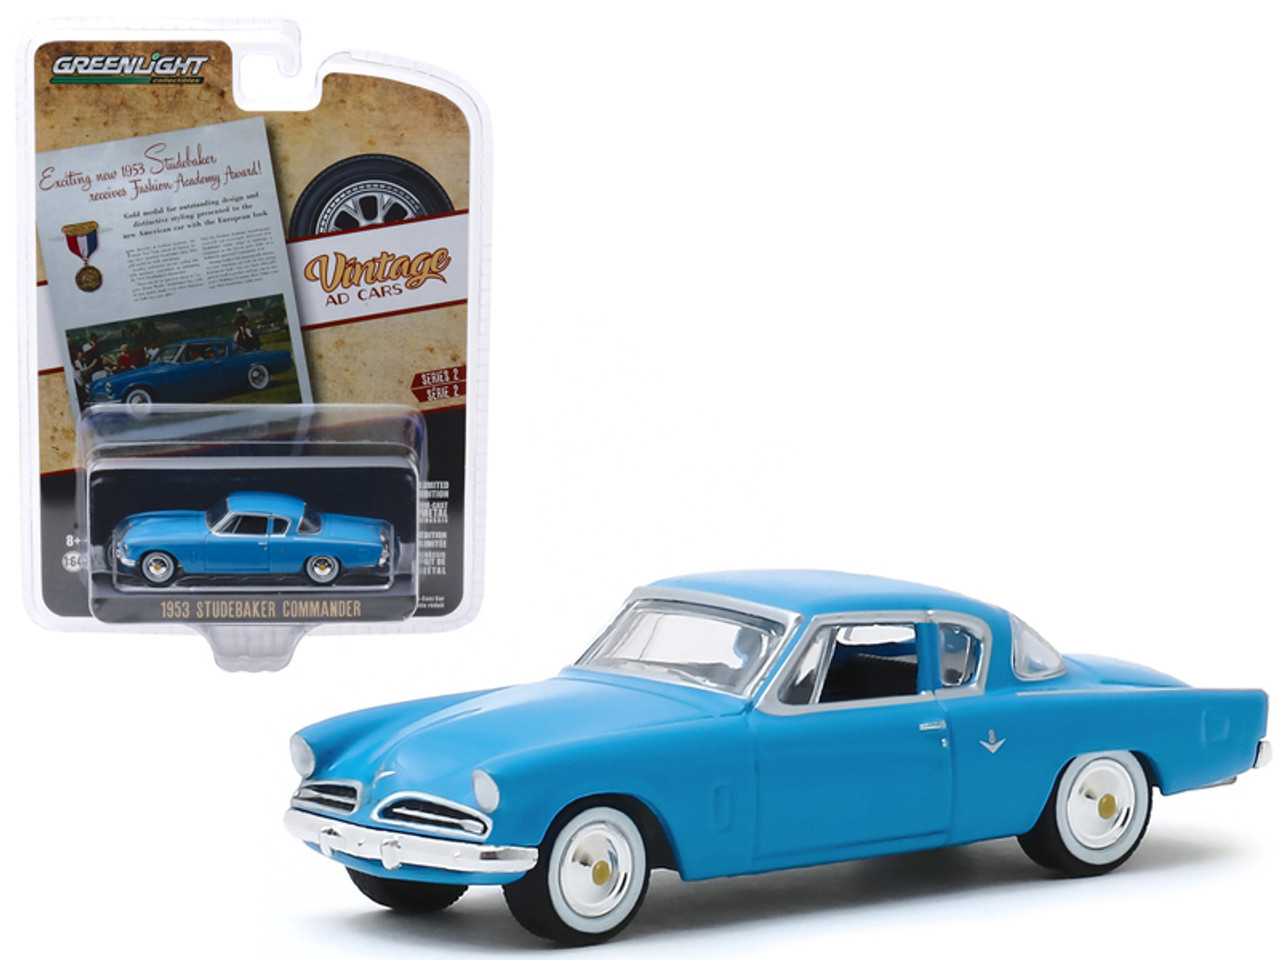 1953 Studebaker Commander Blue "Exciting New 1953 Studebaker Receives Fashion Academy Award!" "Vintage Ad Cars" Series 2 1/64 Diecast Model Car by Greenlight